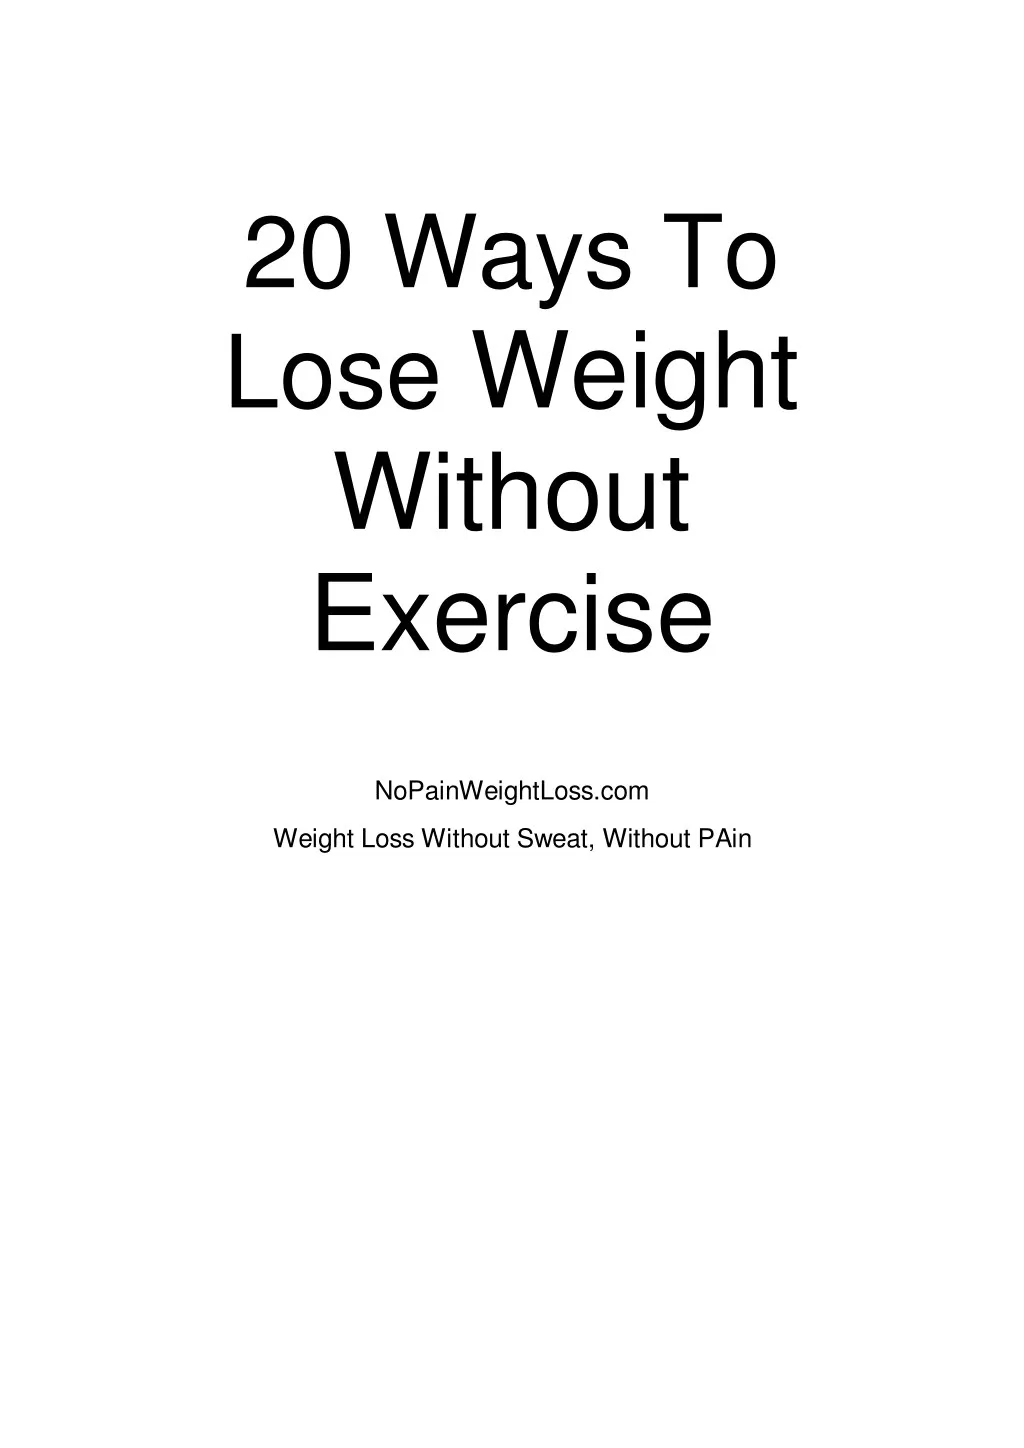 20 ways to lose weight without exercise